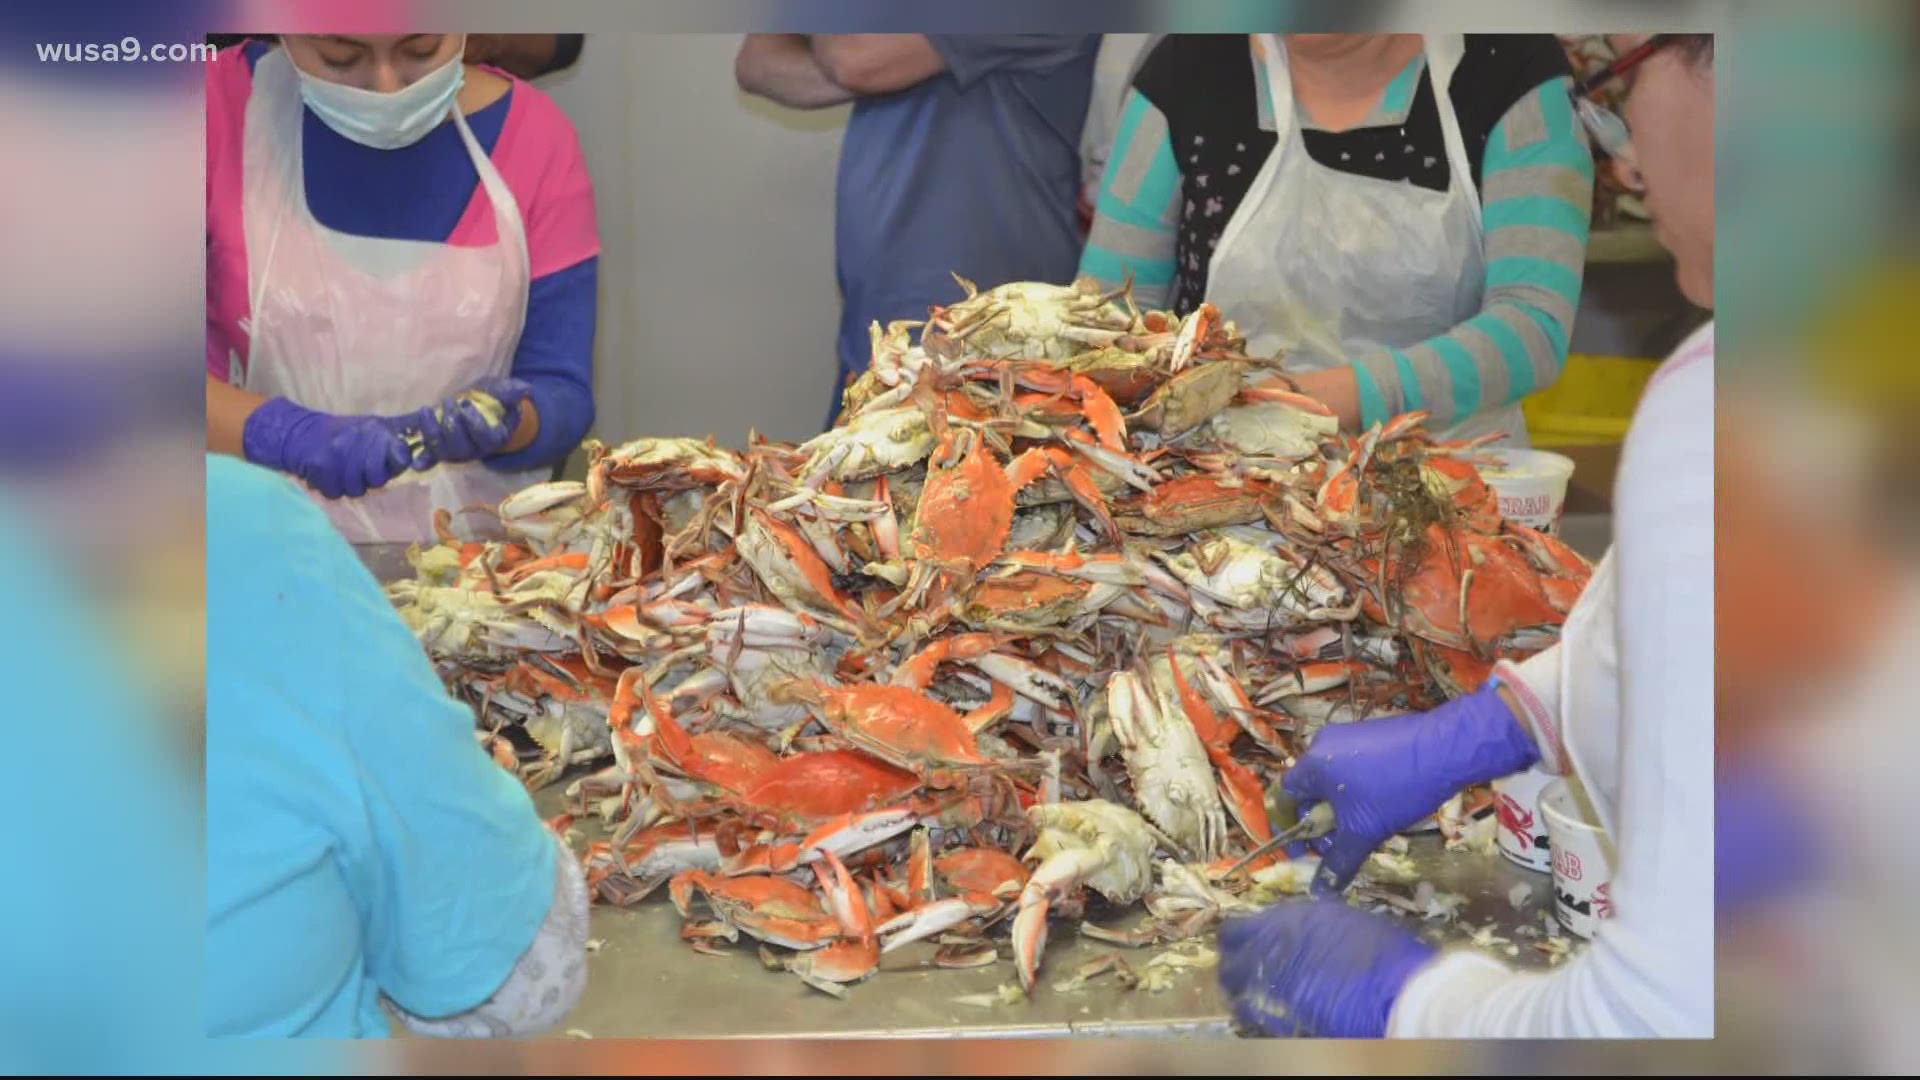 A manager of a Maryland seafood company said that business is down 75% as the economic downturn has led to fewer people ordering from restaurants.